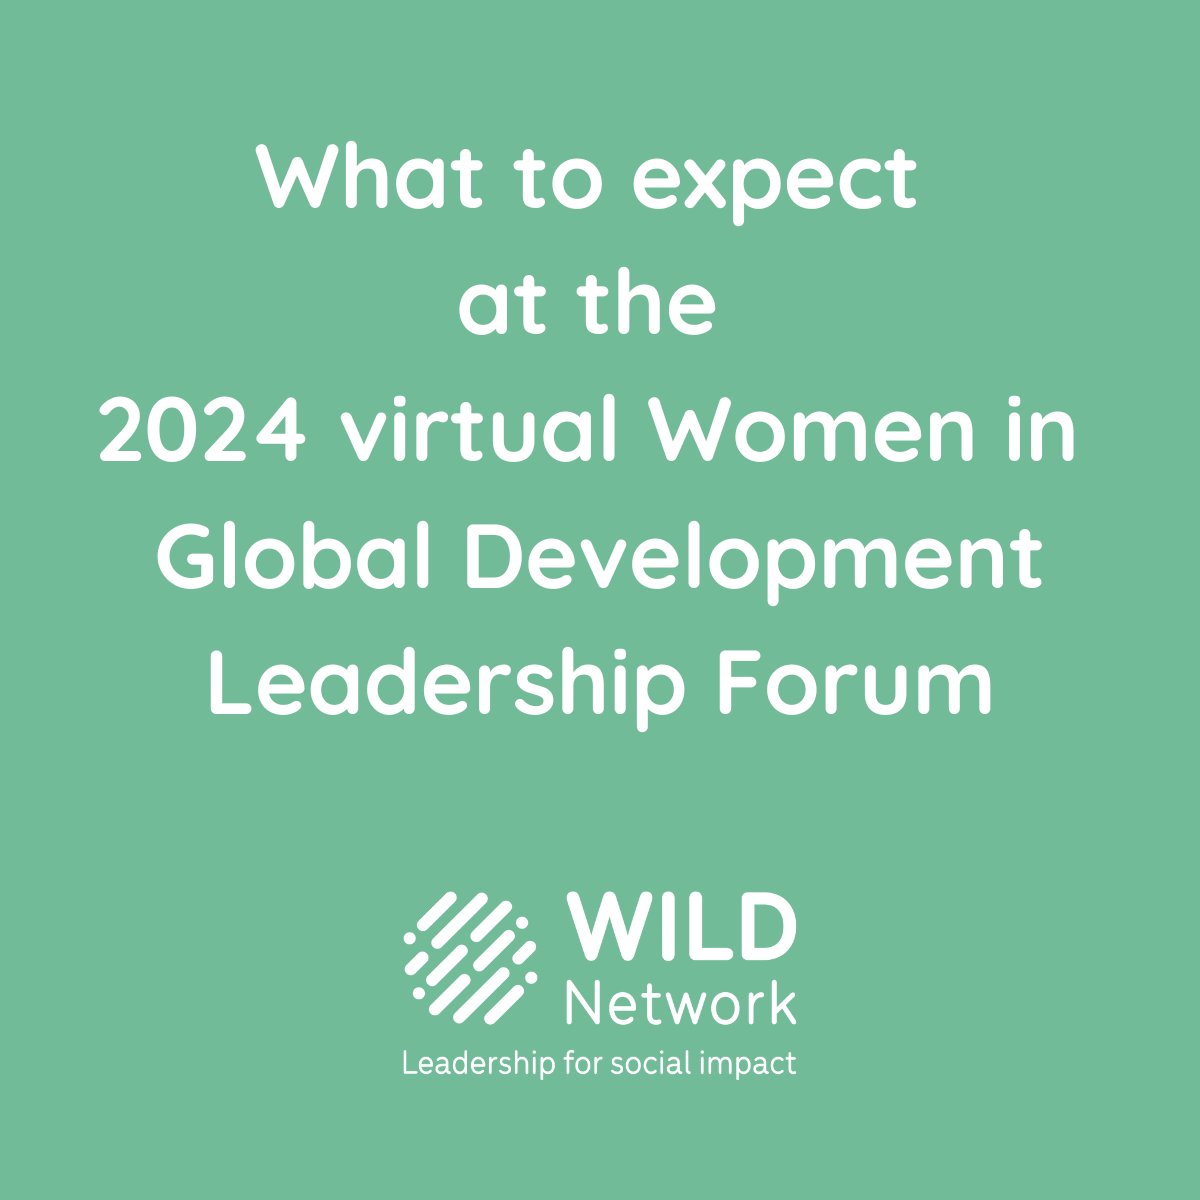 Join the 2024 virtual WILD Forum for:

✅Actionable leadership insights
✅High visibility for diversity commitment
✅Meaningful networking

#WILDleaders #Leadership #DEI #DEIA #network #diversity #internationaldevelopment #globaldevelopment #womenindevelopment